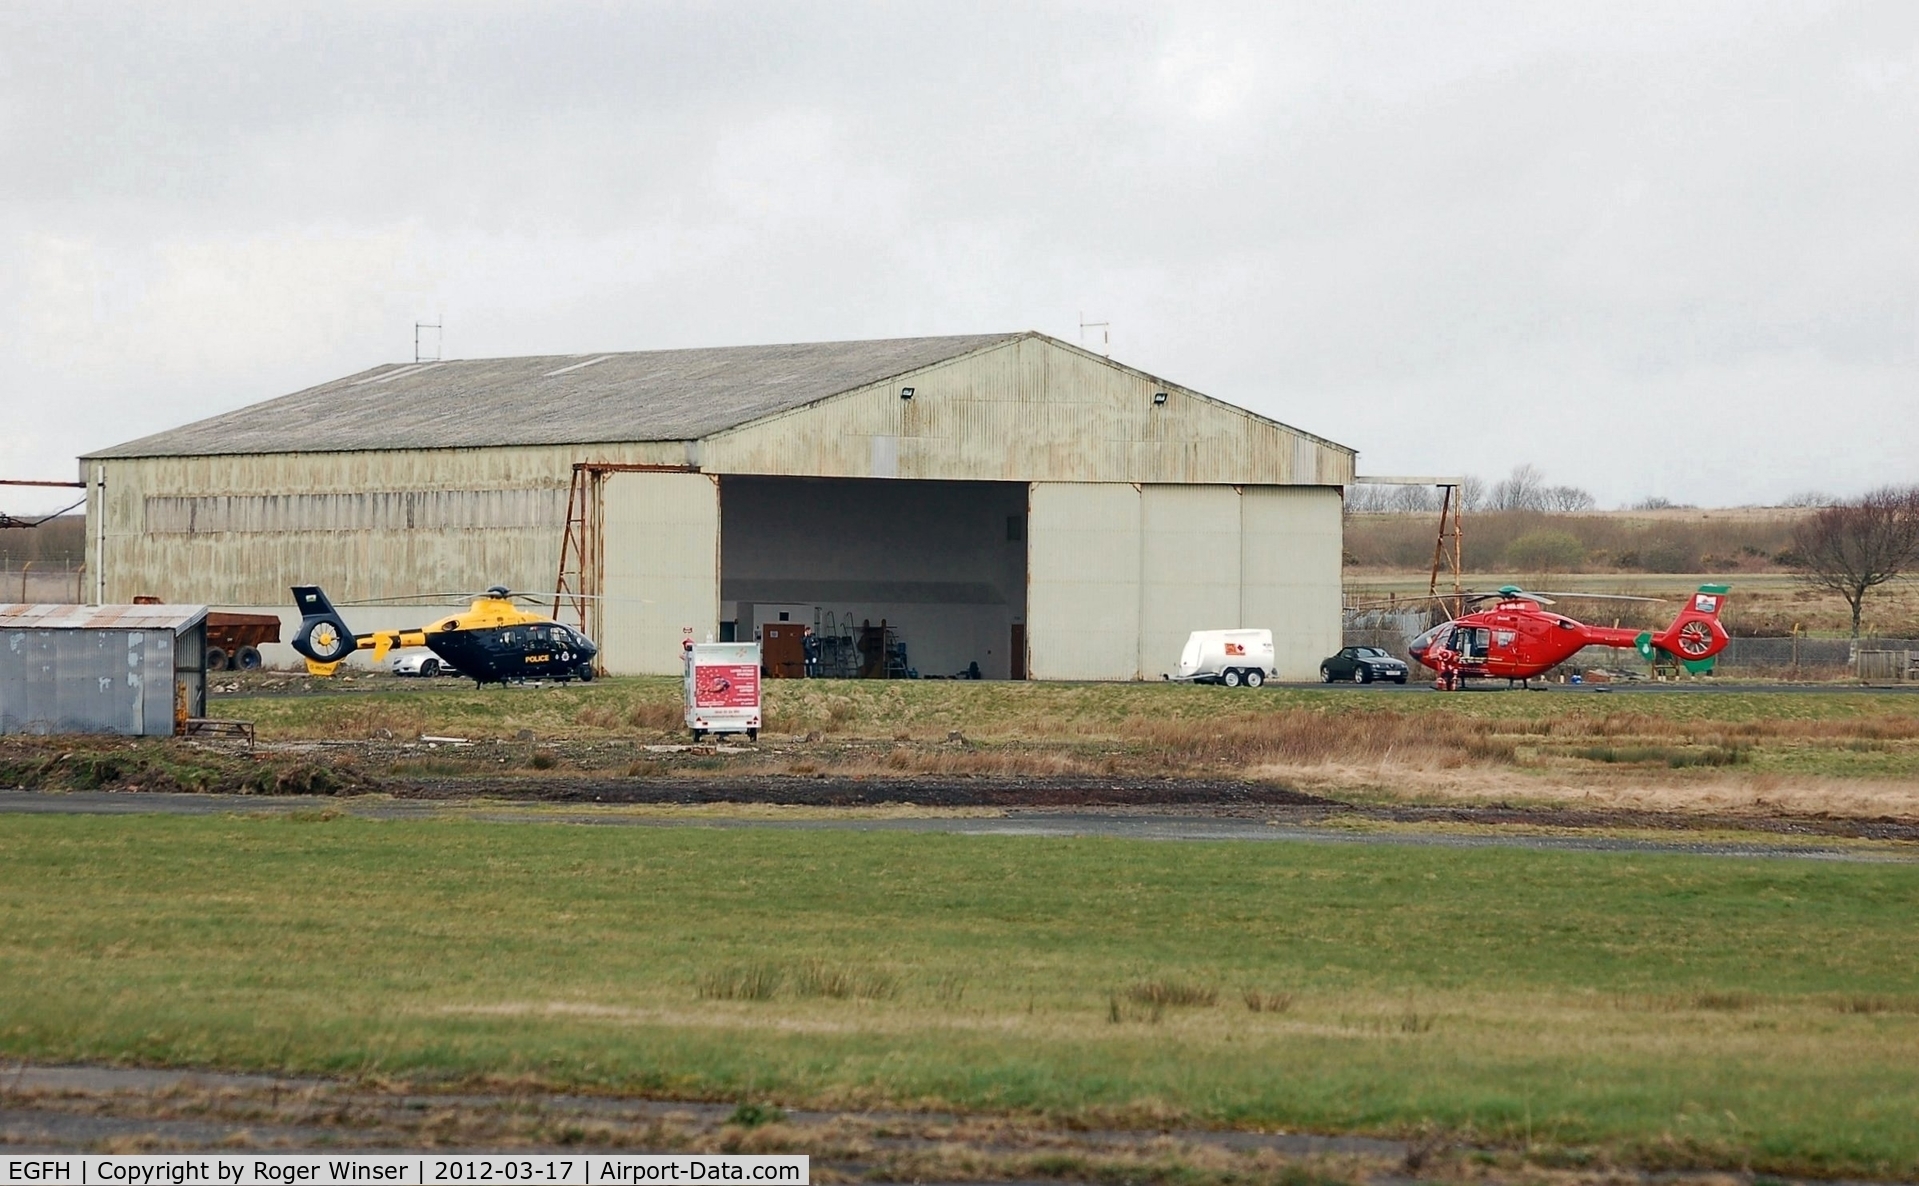 Swansea Airport, Swansea, Wales United Kingdom (EGFH) - Emergency services (police and air ambulance) helicopters at the Wales Air Ambulance base in Hangar 1.